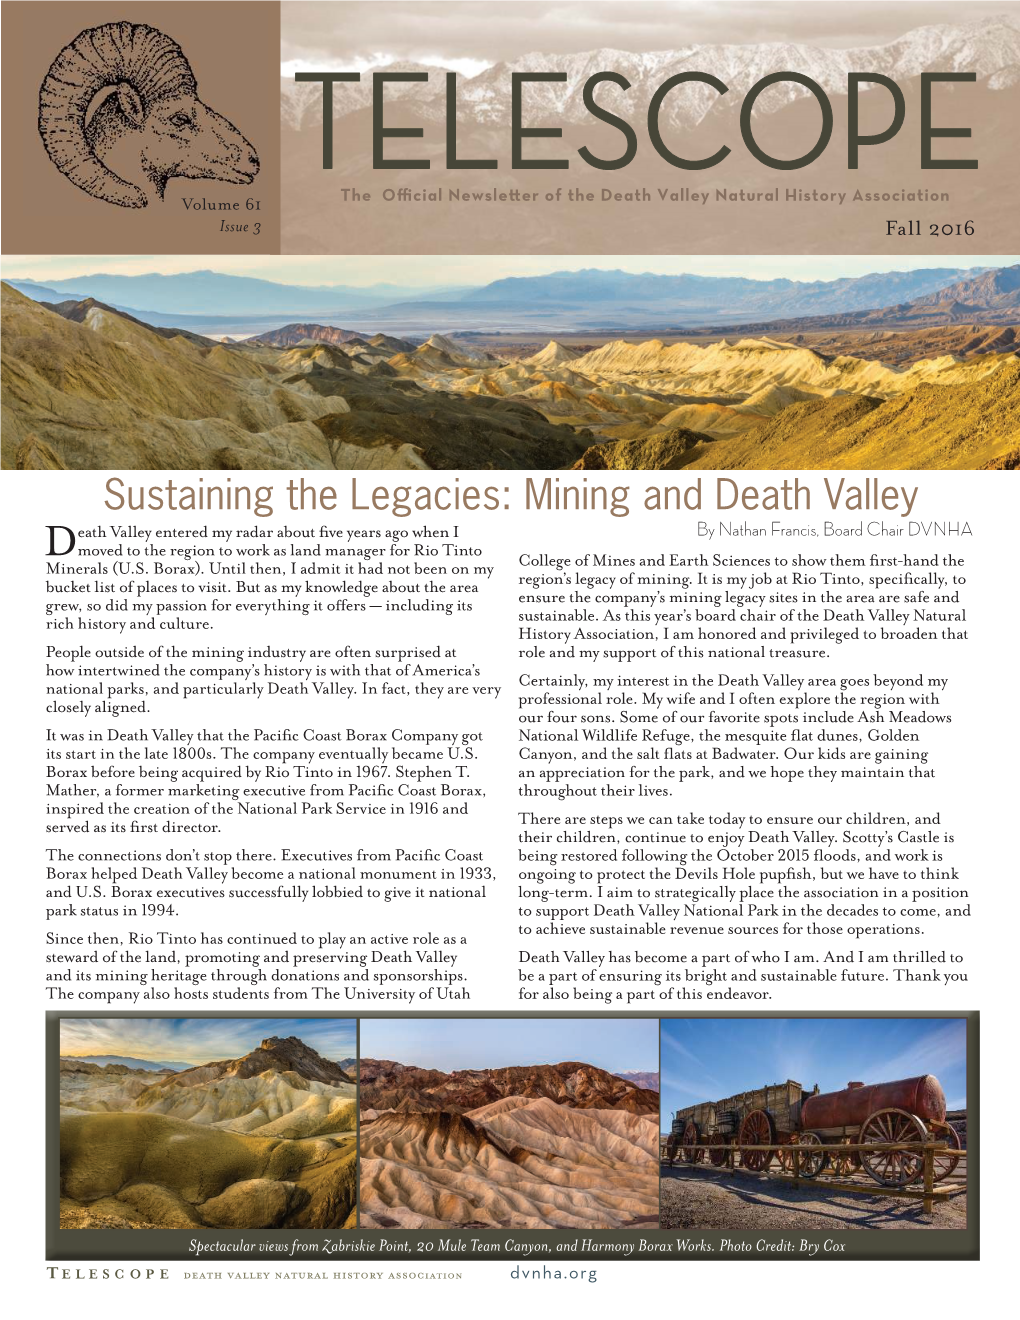 Sustaining the Legacies: Mining and Death Valley